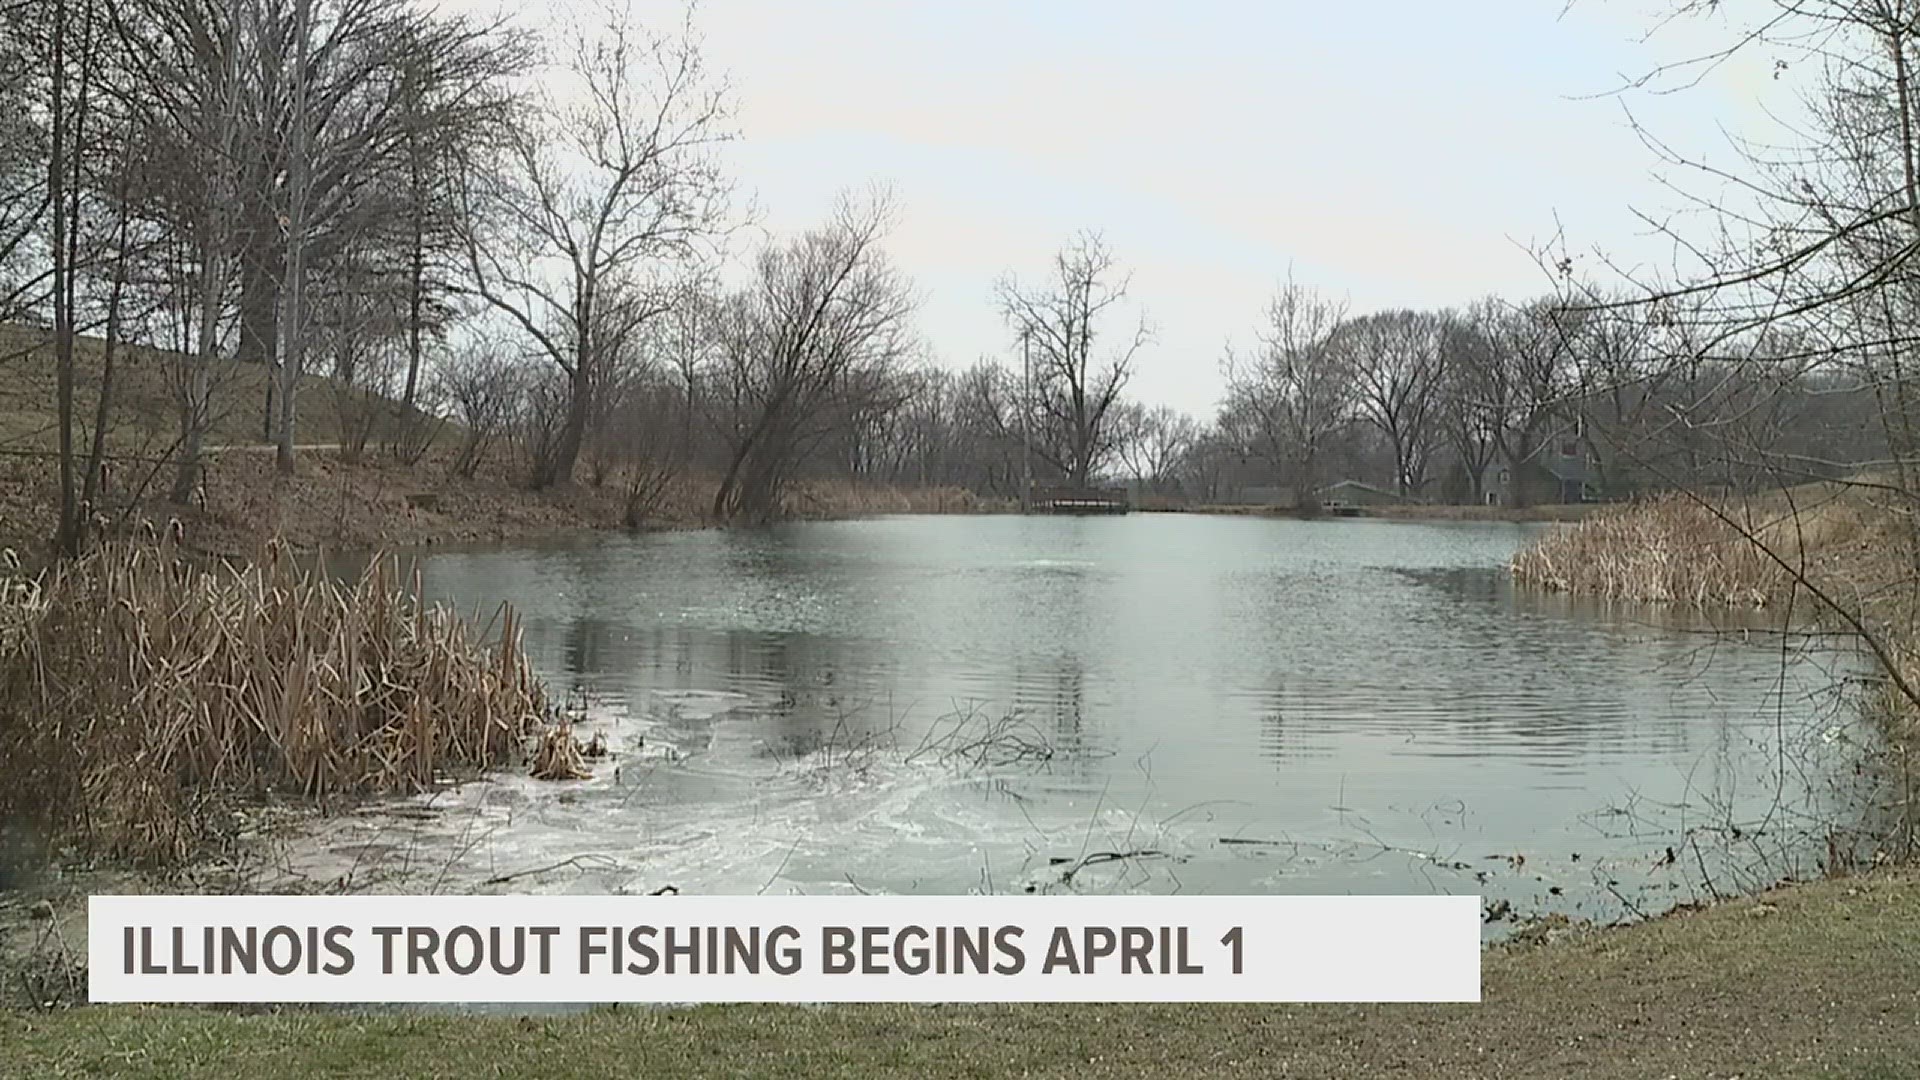 The Illinois spring trout fishing season opens April 1 at 58 locations statewide.